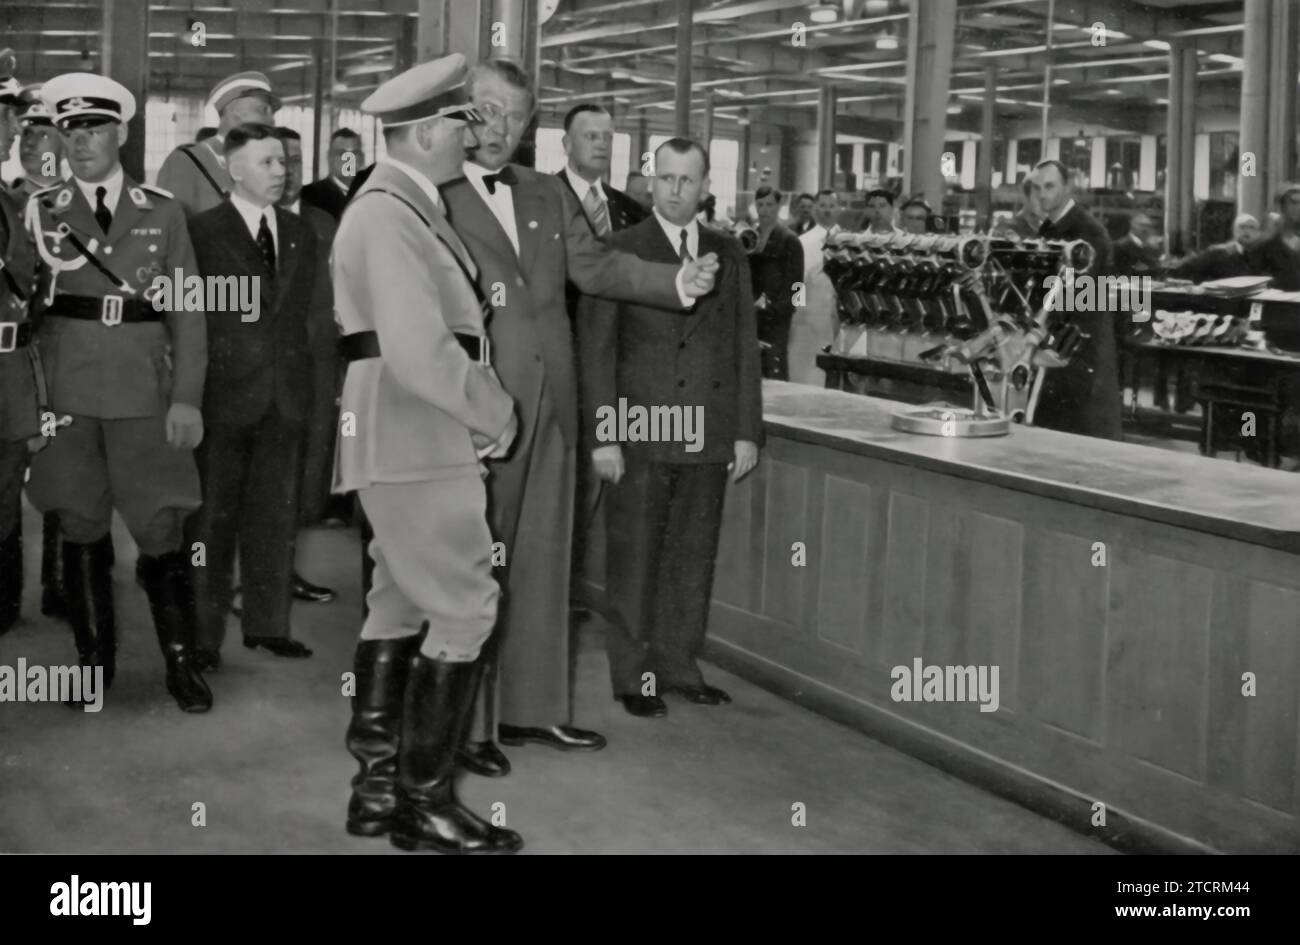 During a visit to the Bavarian Motor Works (BMW), Adolf Hitler is captured engaging with one of Germany's key industrial sectors. This visit underscores his regime's focus on supporting and advancing Germany's automotive and engineering industries. BMW, being a prominent manufacturer, played a significant role in the industrial strategy of Nazi Germany, particularly in terms of military vehicle production. Hitler's presence at the facility symbolizes the Nazi government's commitment to industrial growth and the mobilization of resources for its economic and military objectives. Stock Photo